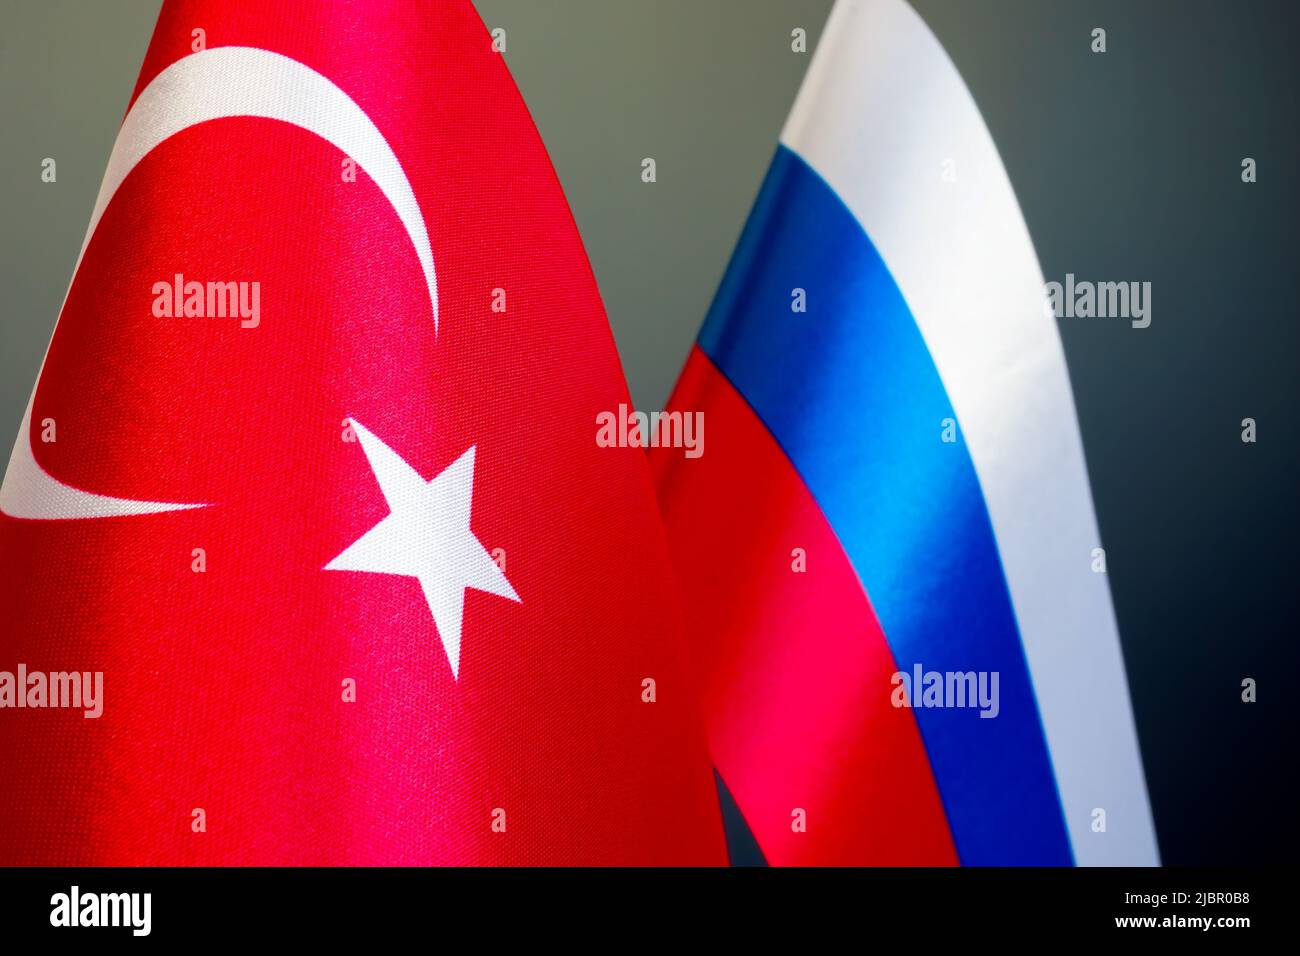 Small flags of Turkey and Russia as a symbol of diplomacy. Stock Photo